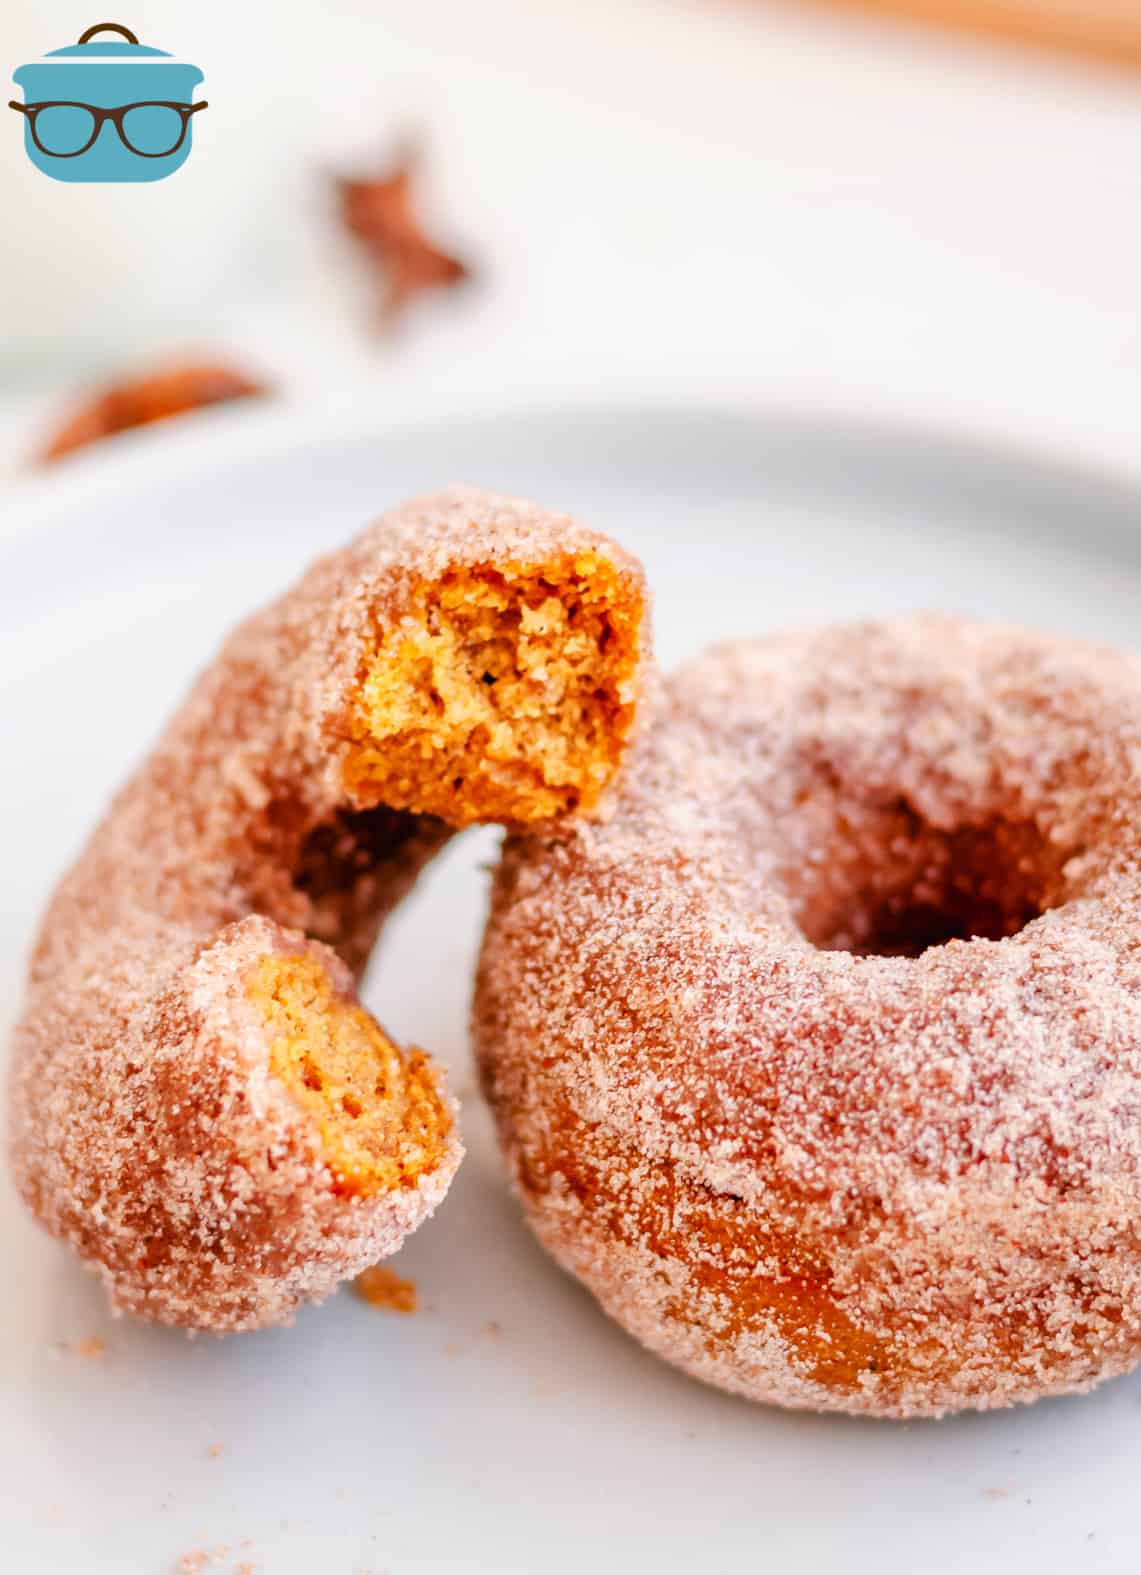 Two Baked Pumpkin Donuts on white plate with one donut broken in half.